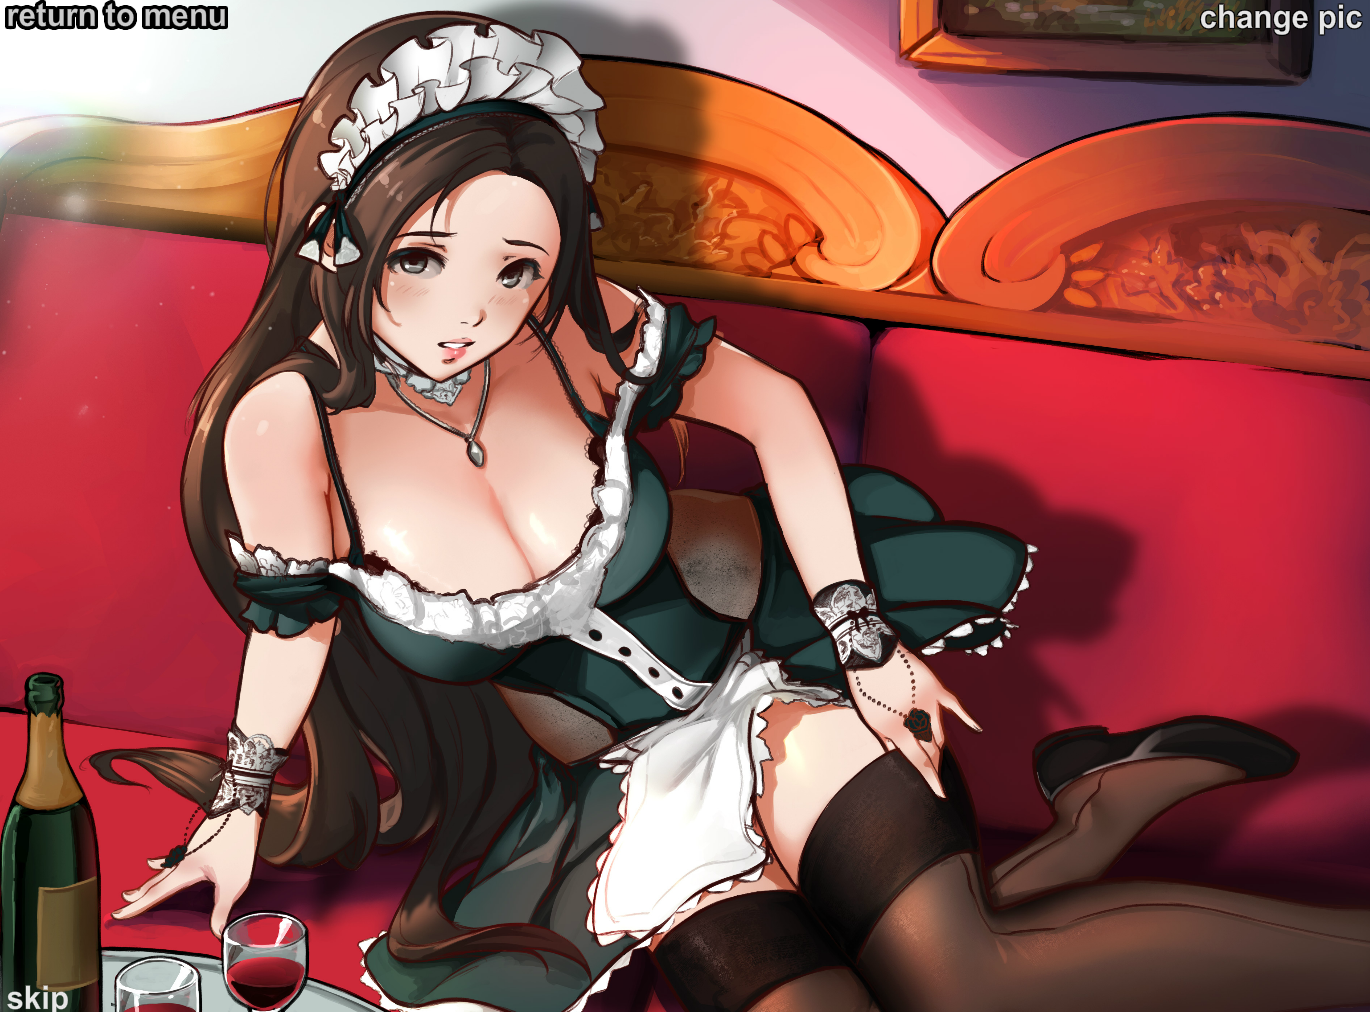 Maid Service [COMPLETED] - free game download, reviews, mega - xGames